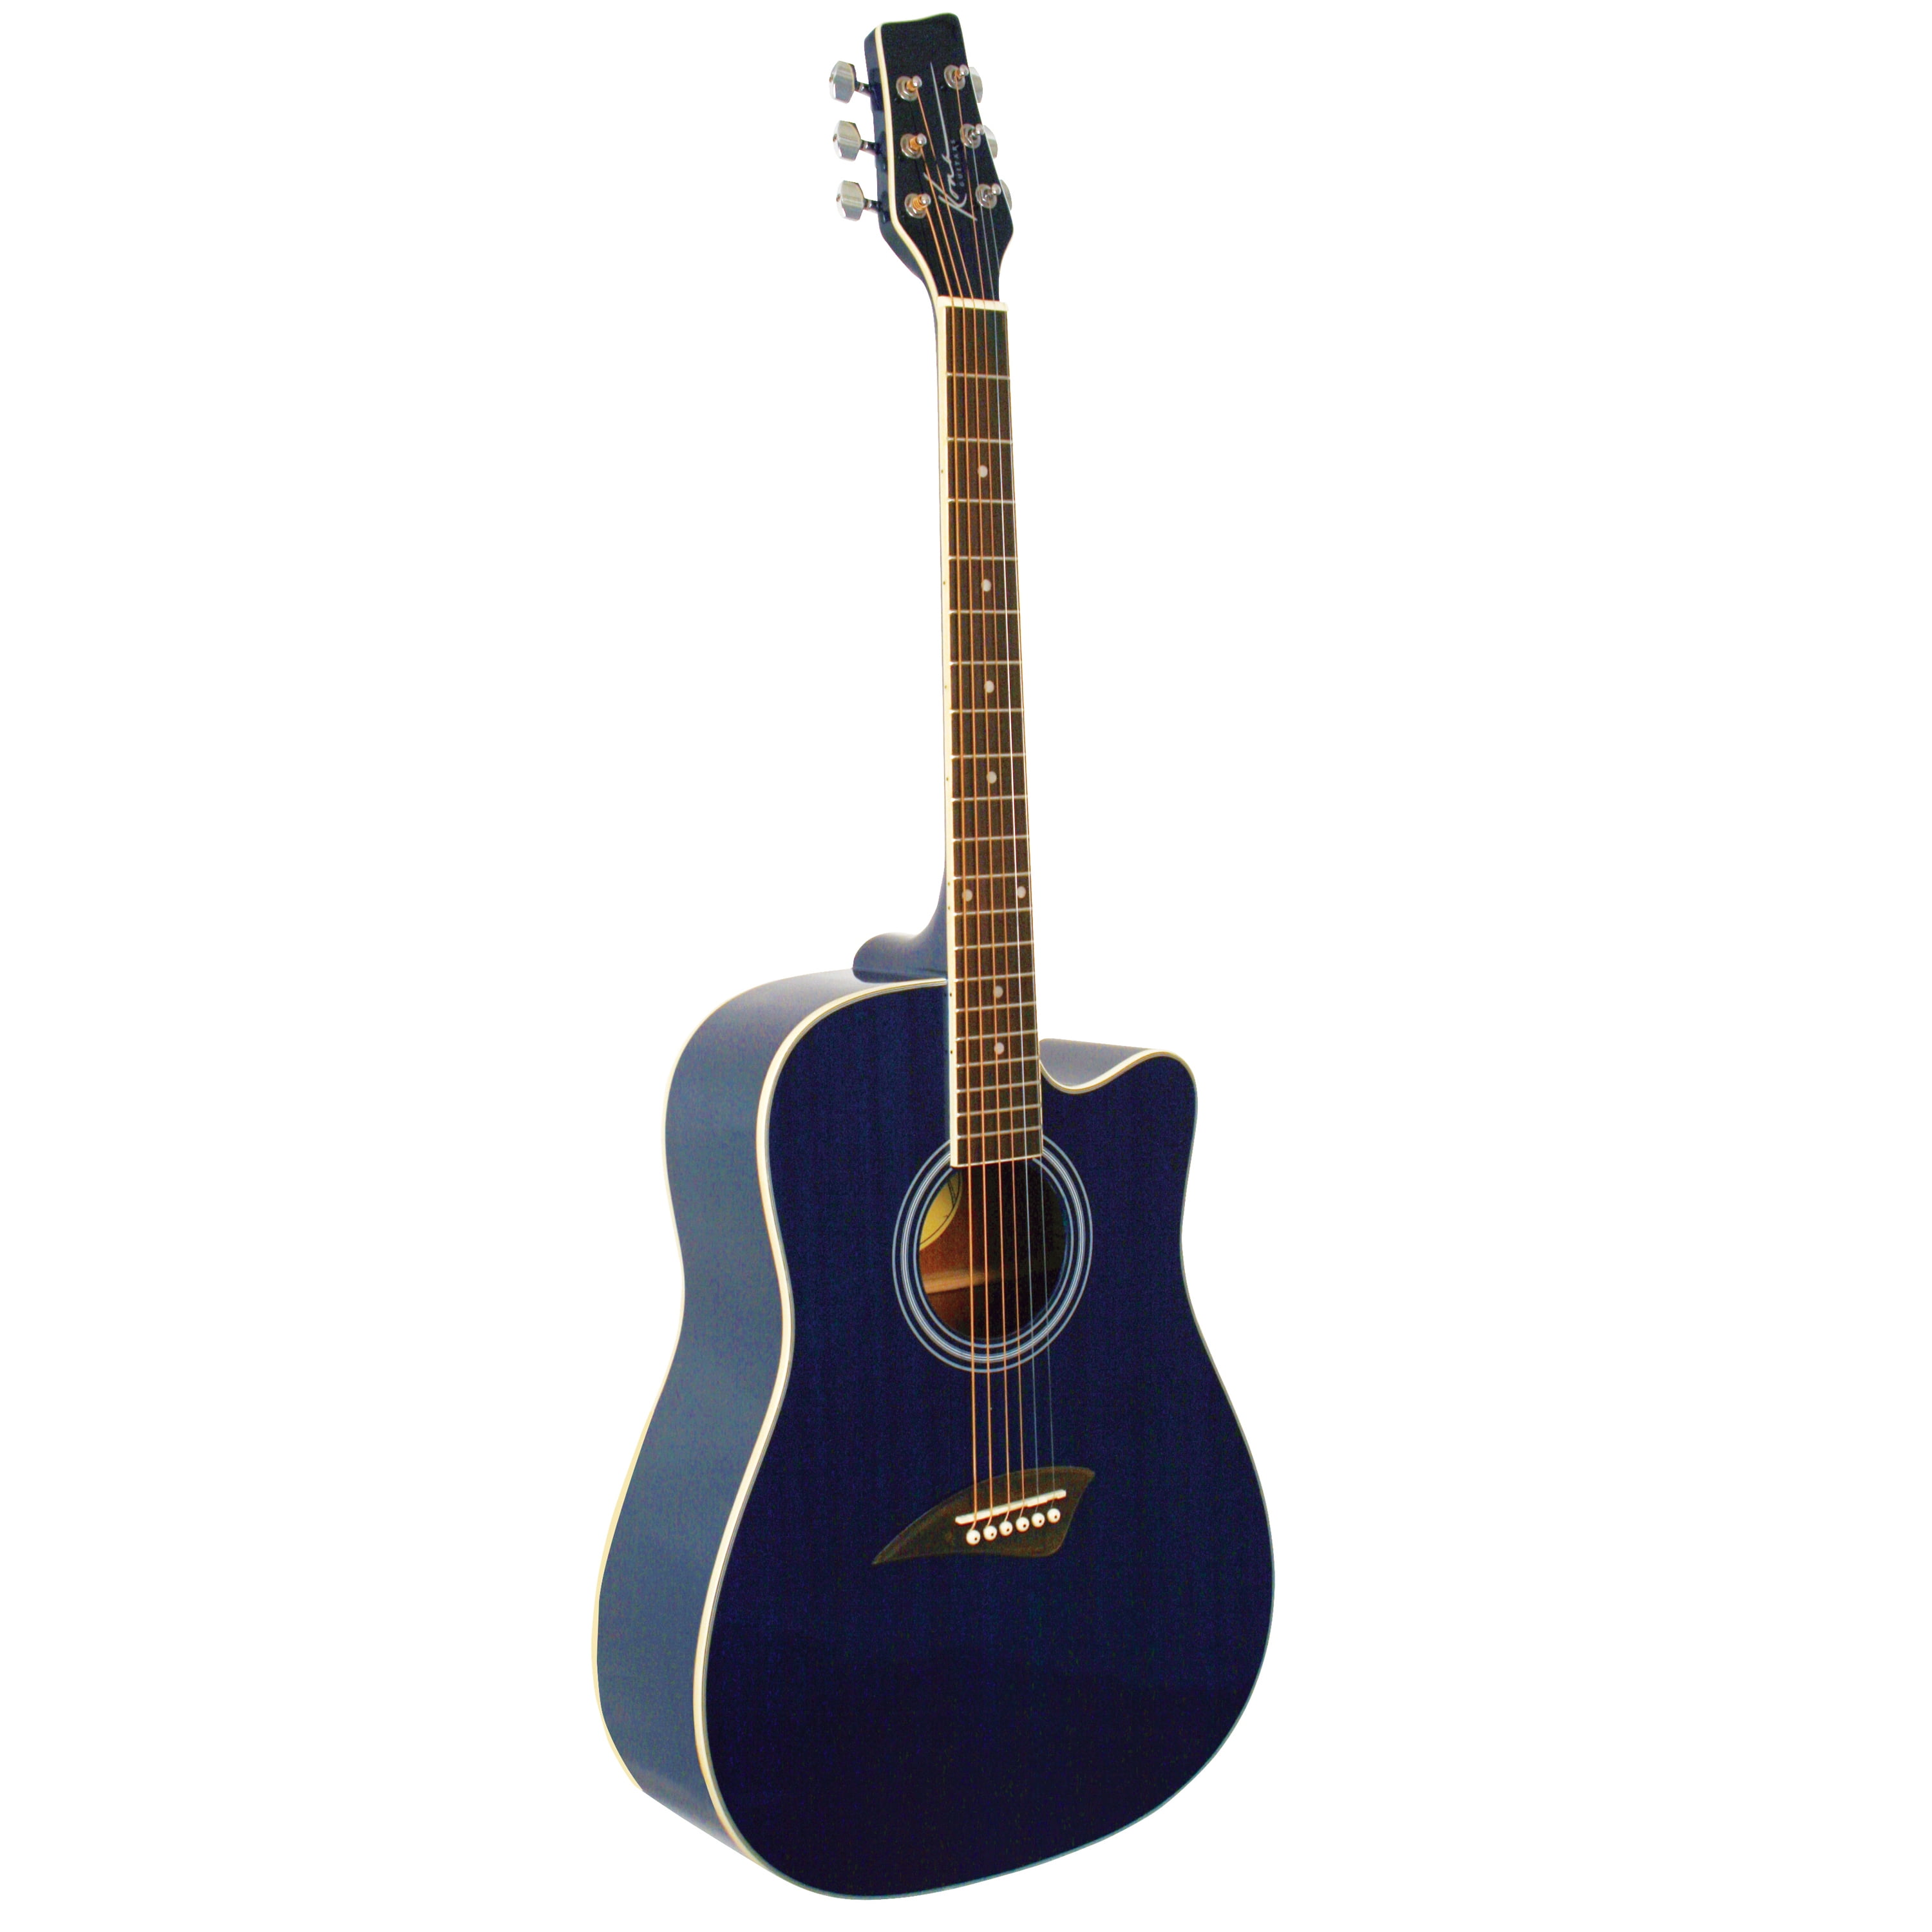 Fever Dreadnought Cutaway Acoustic Guitar Blue with Bag, Tuner and 